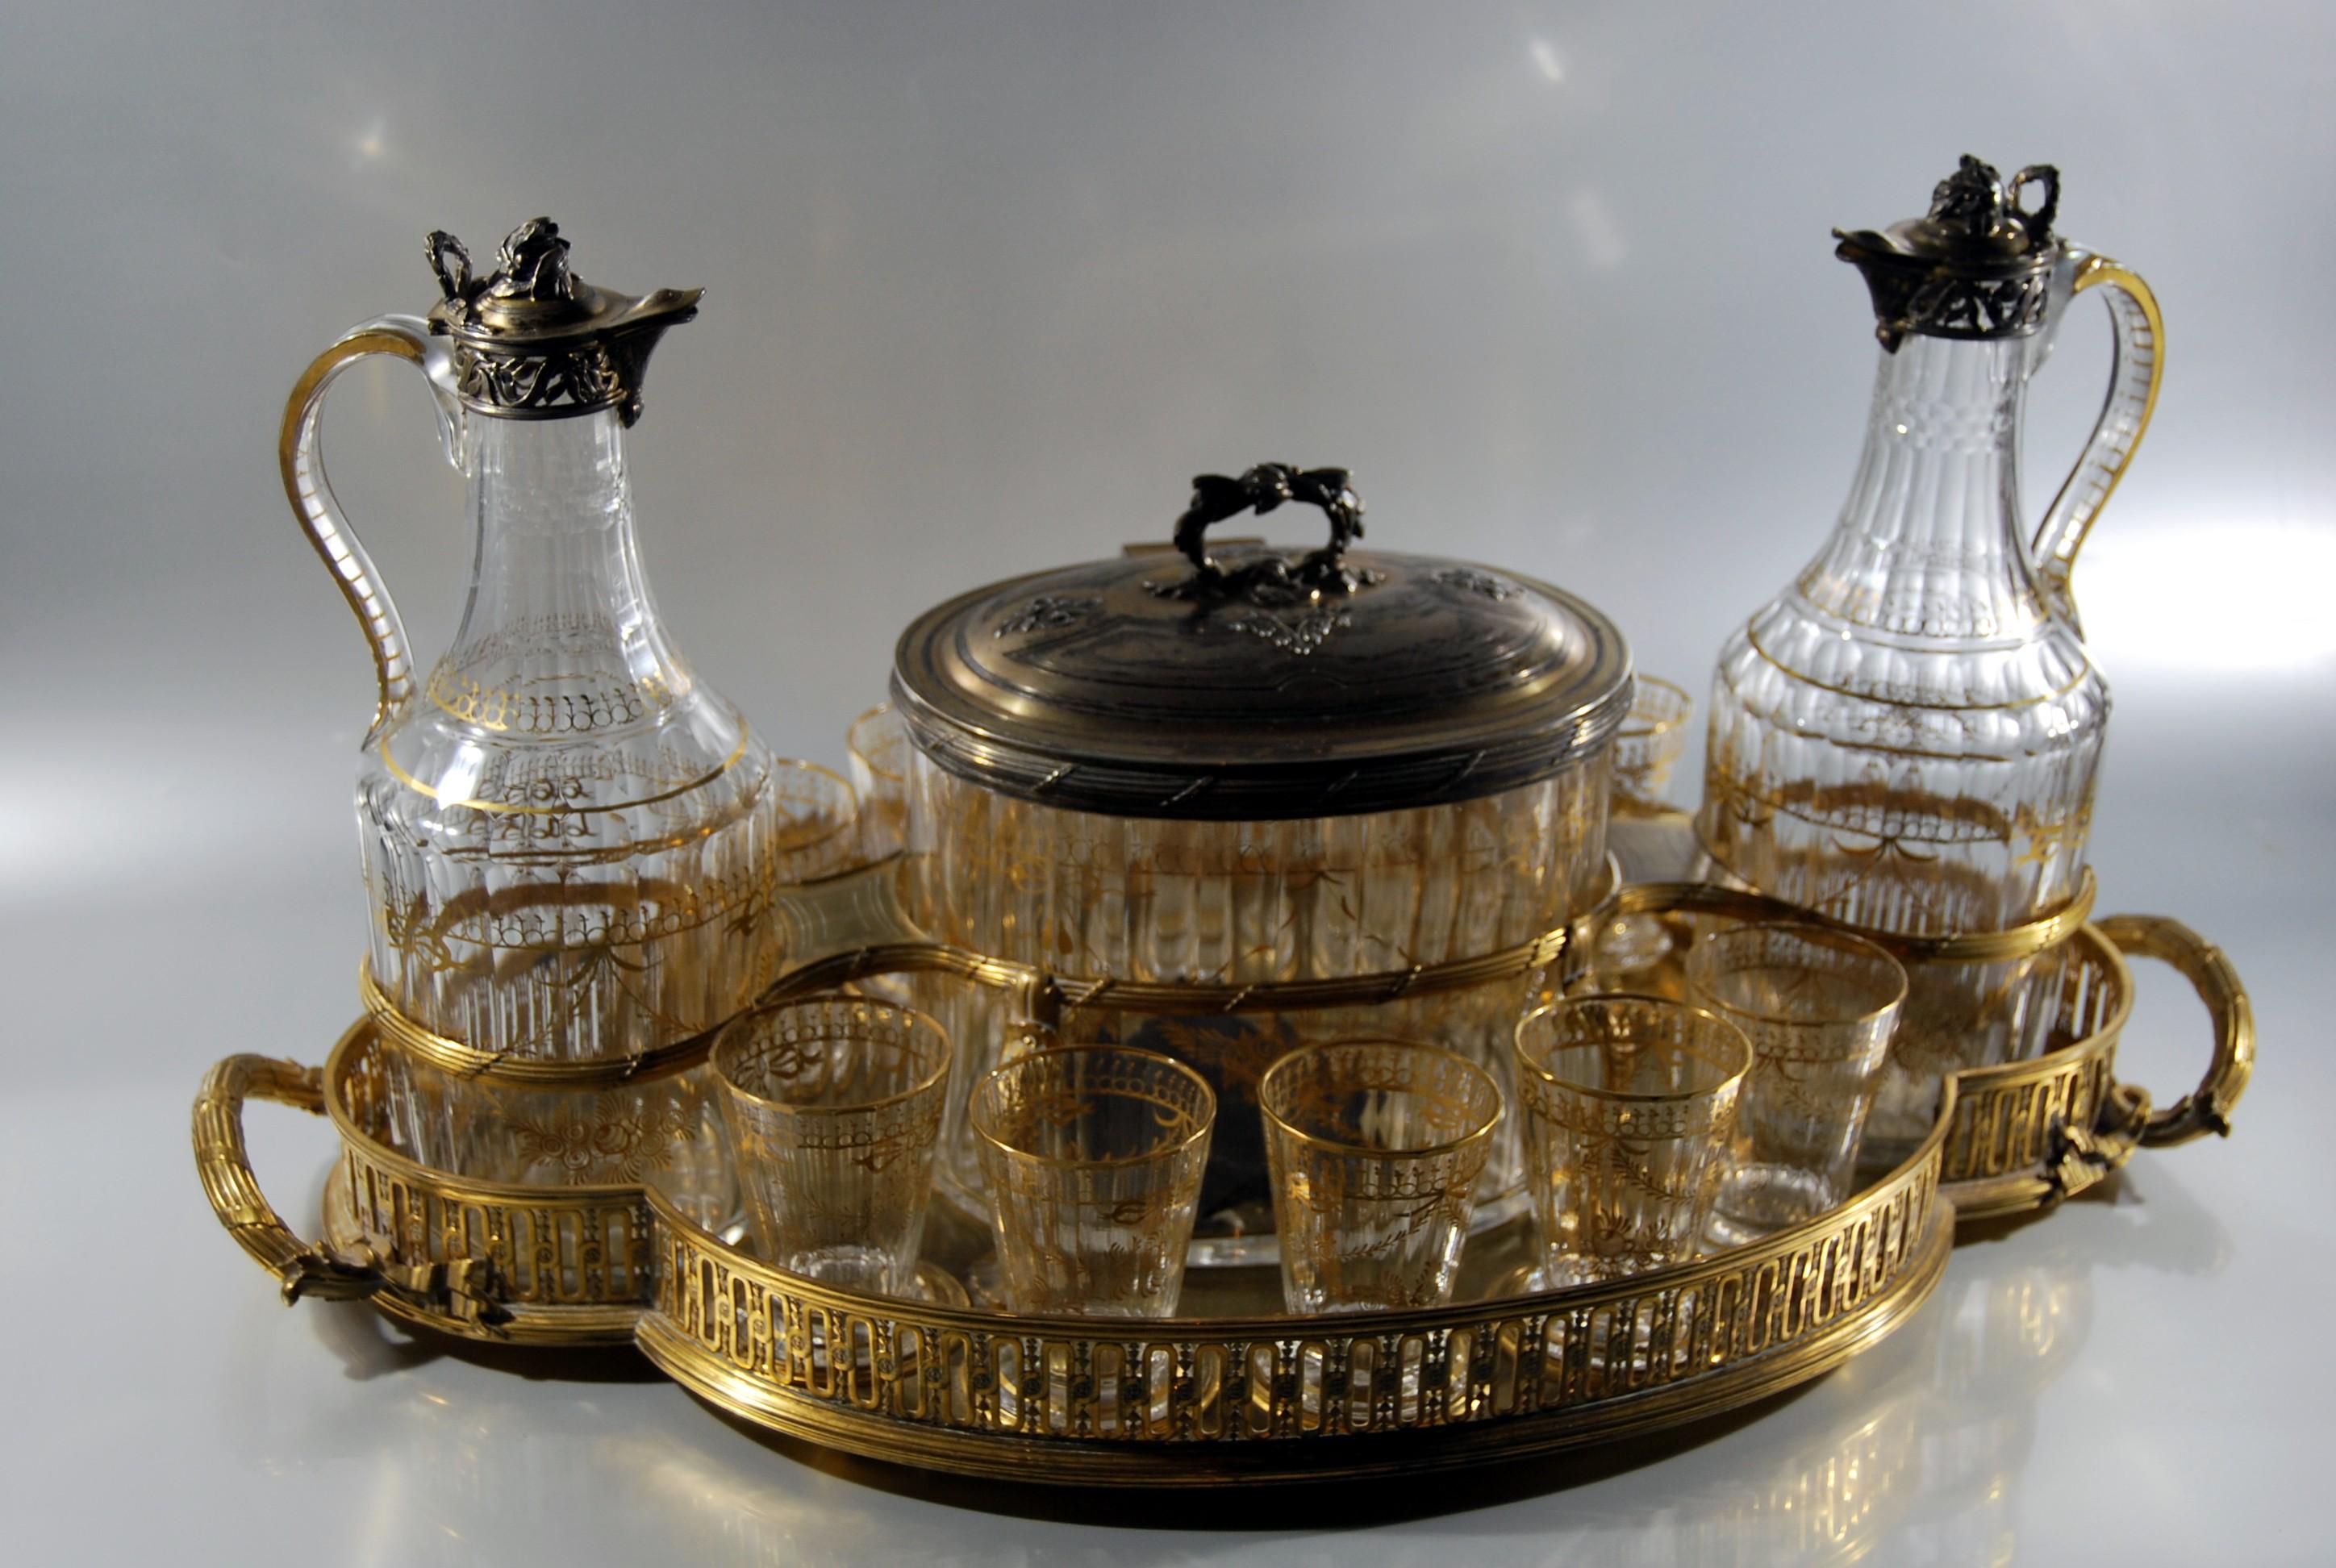 Rare cabaret centerpiece for aperitif, tea or wine in gilt cut glass attributed to Daum with vermeil mount on openwork gilt bronze tray (circa 1891)
The tray dimensions : 19 2/8 x 11 2/8 in
The mounts of the pitchers and the biscuit tin in vermeil